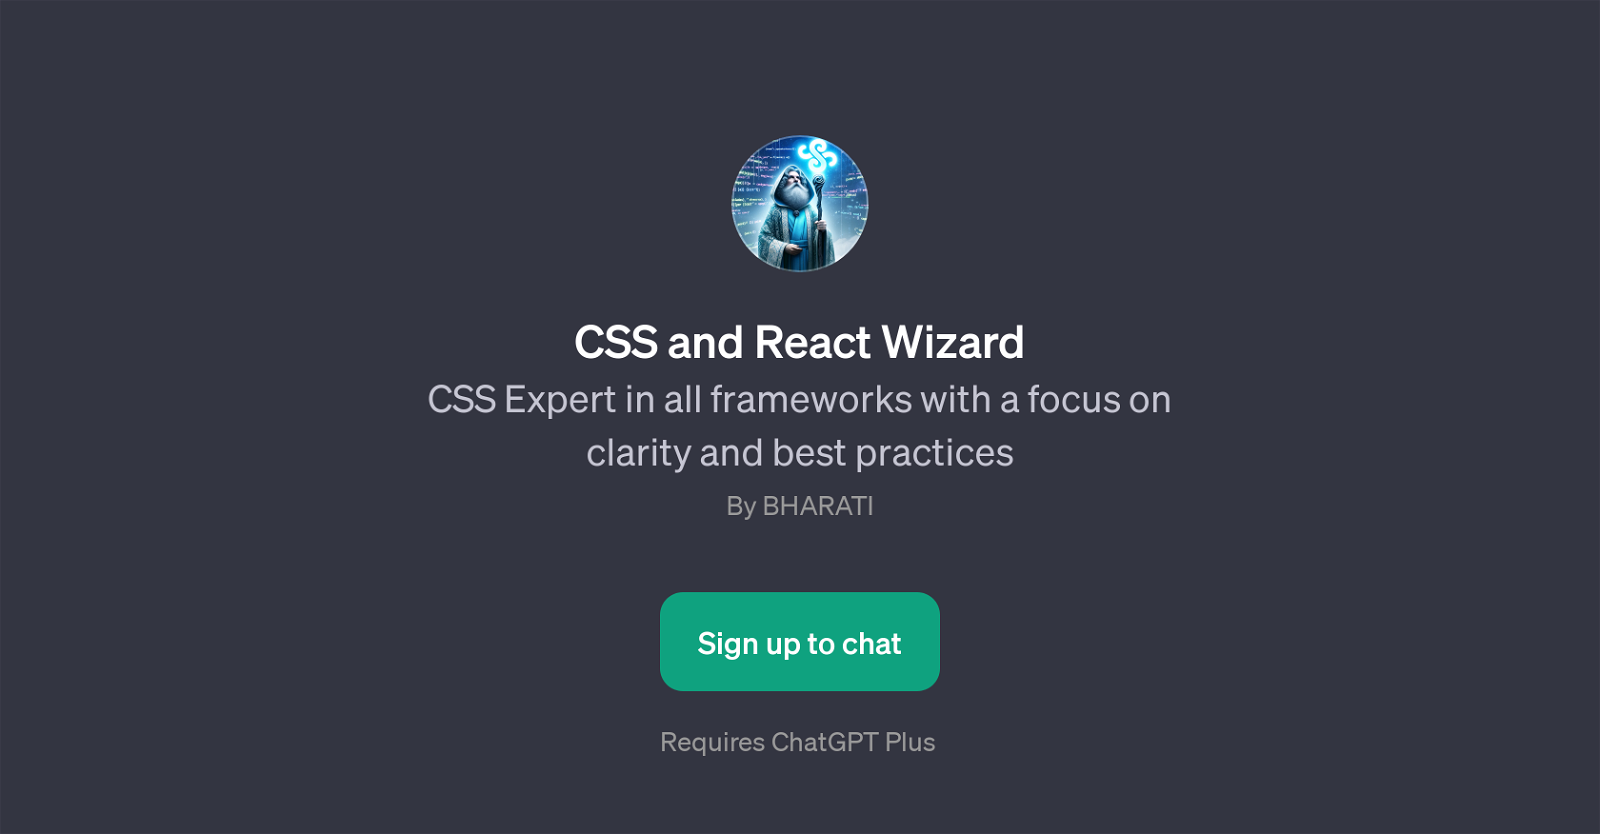 CSS and React Wizard website